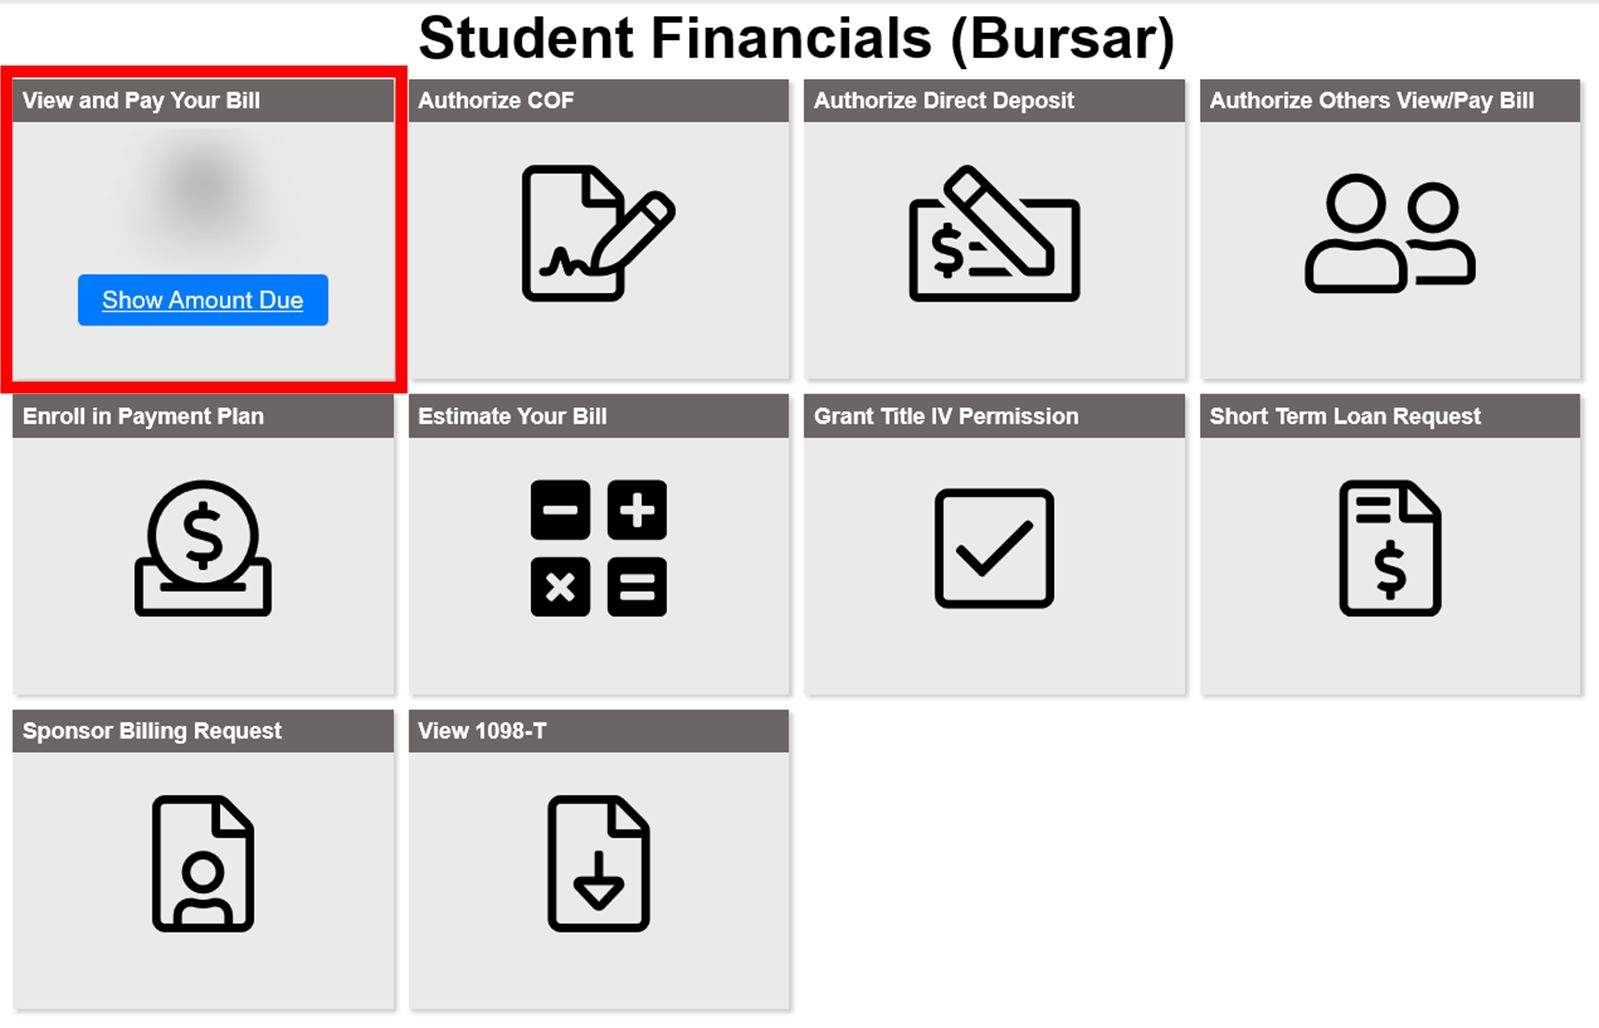 Student Financials Tile - View and Pay Your Bill